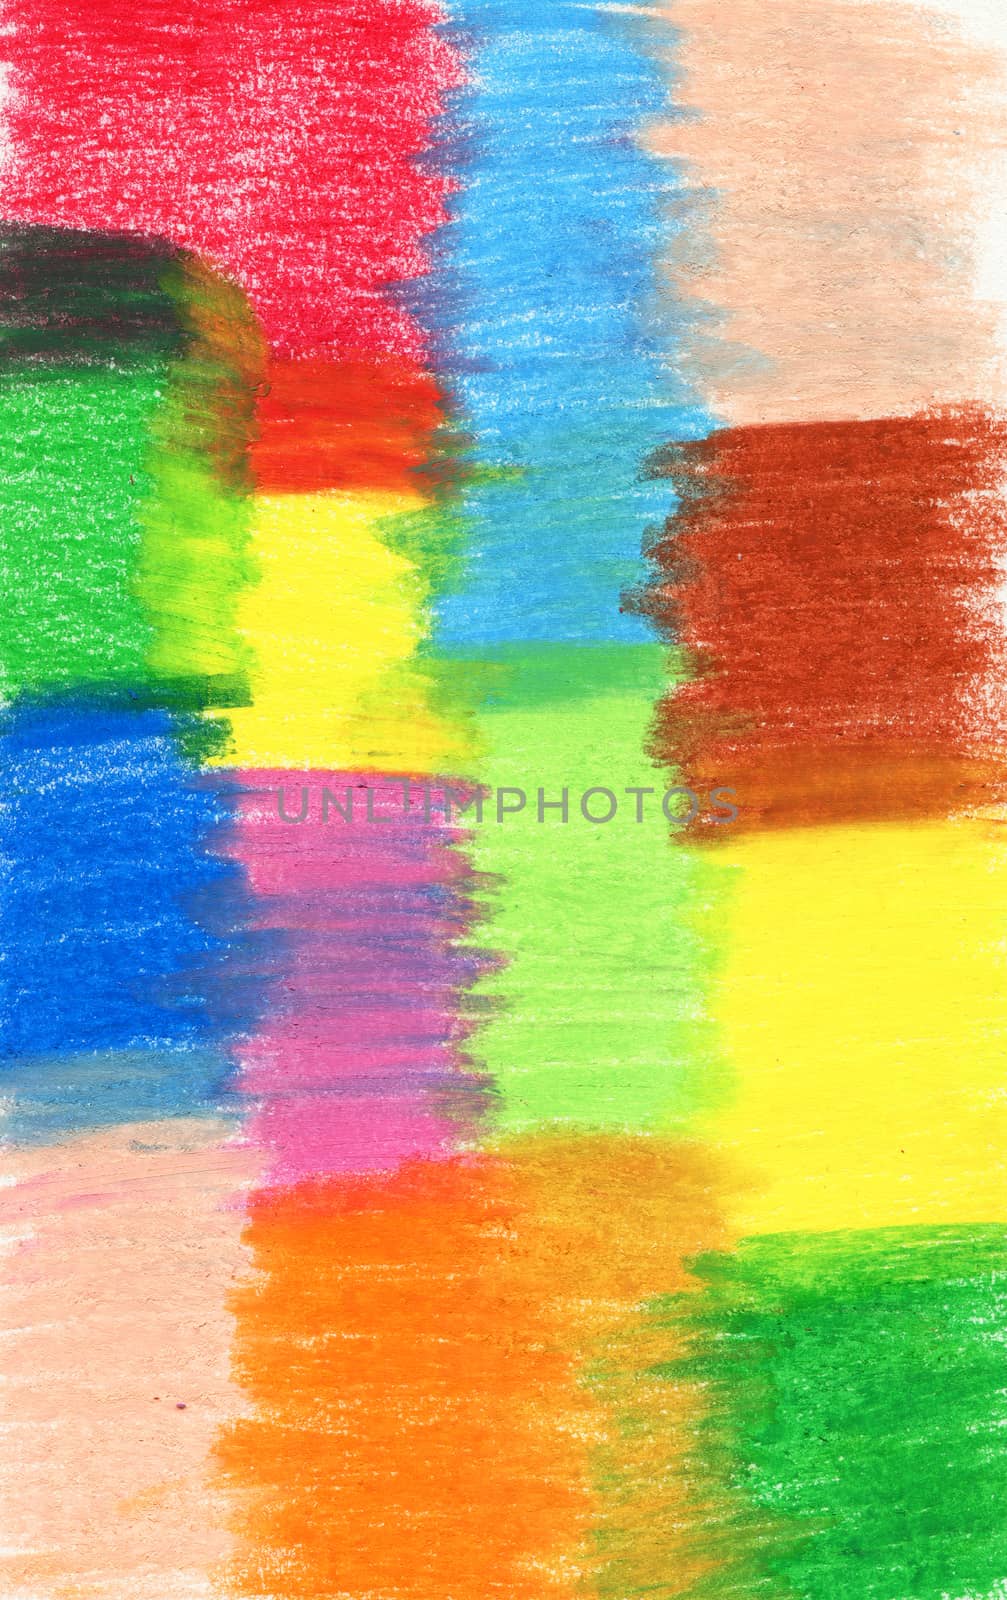 Abstract colorful background painted in pastels